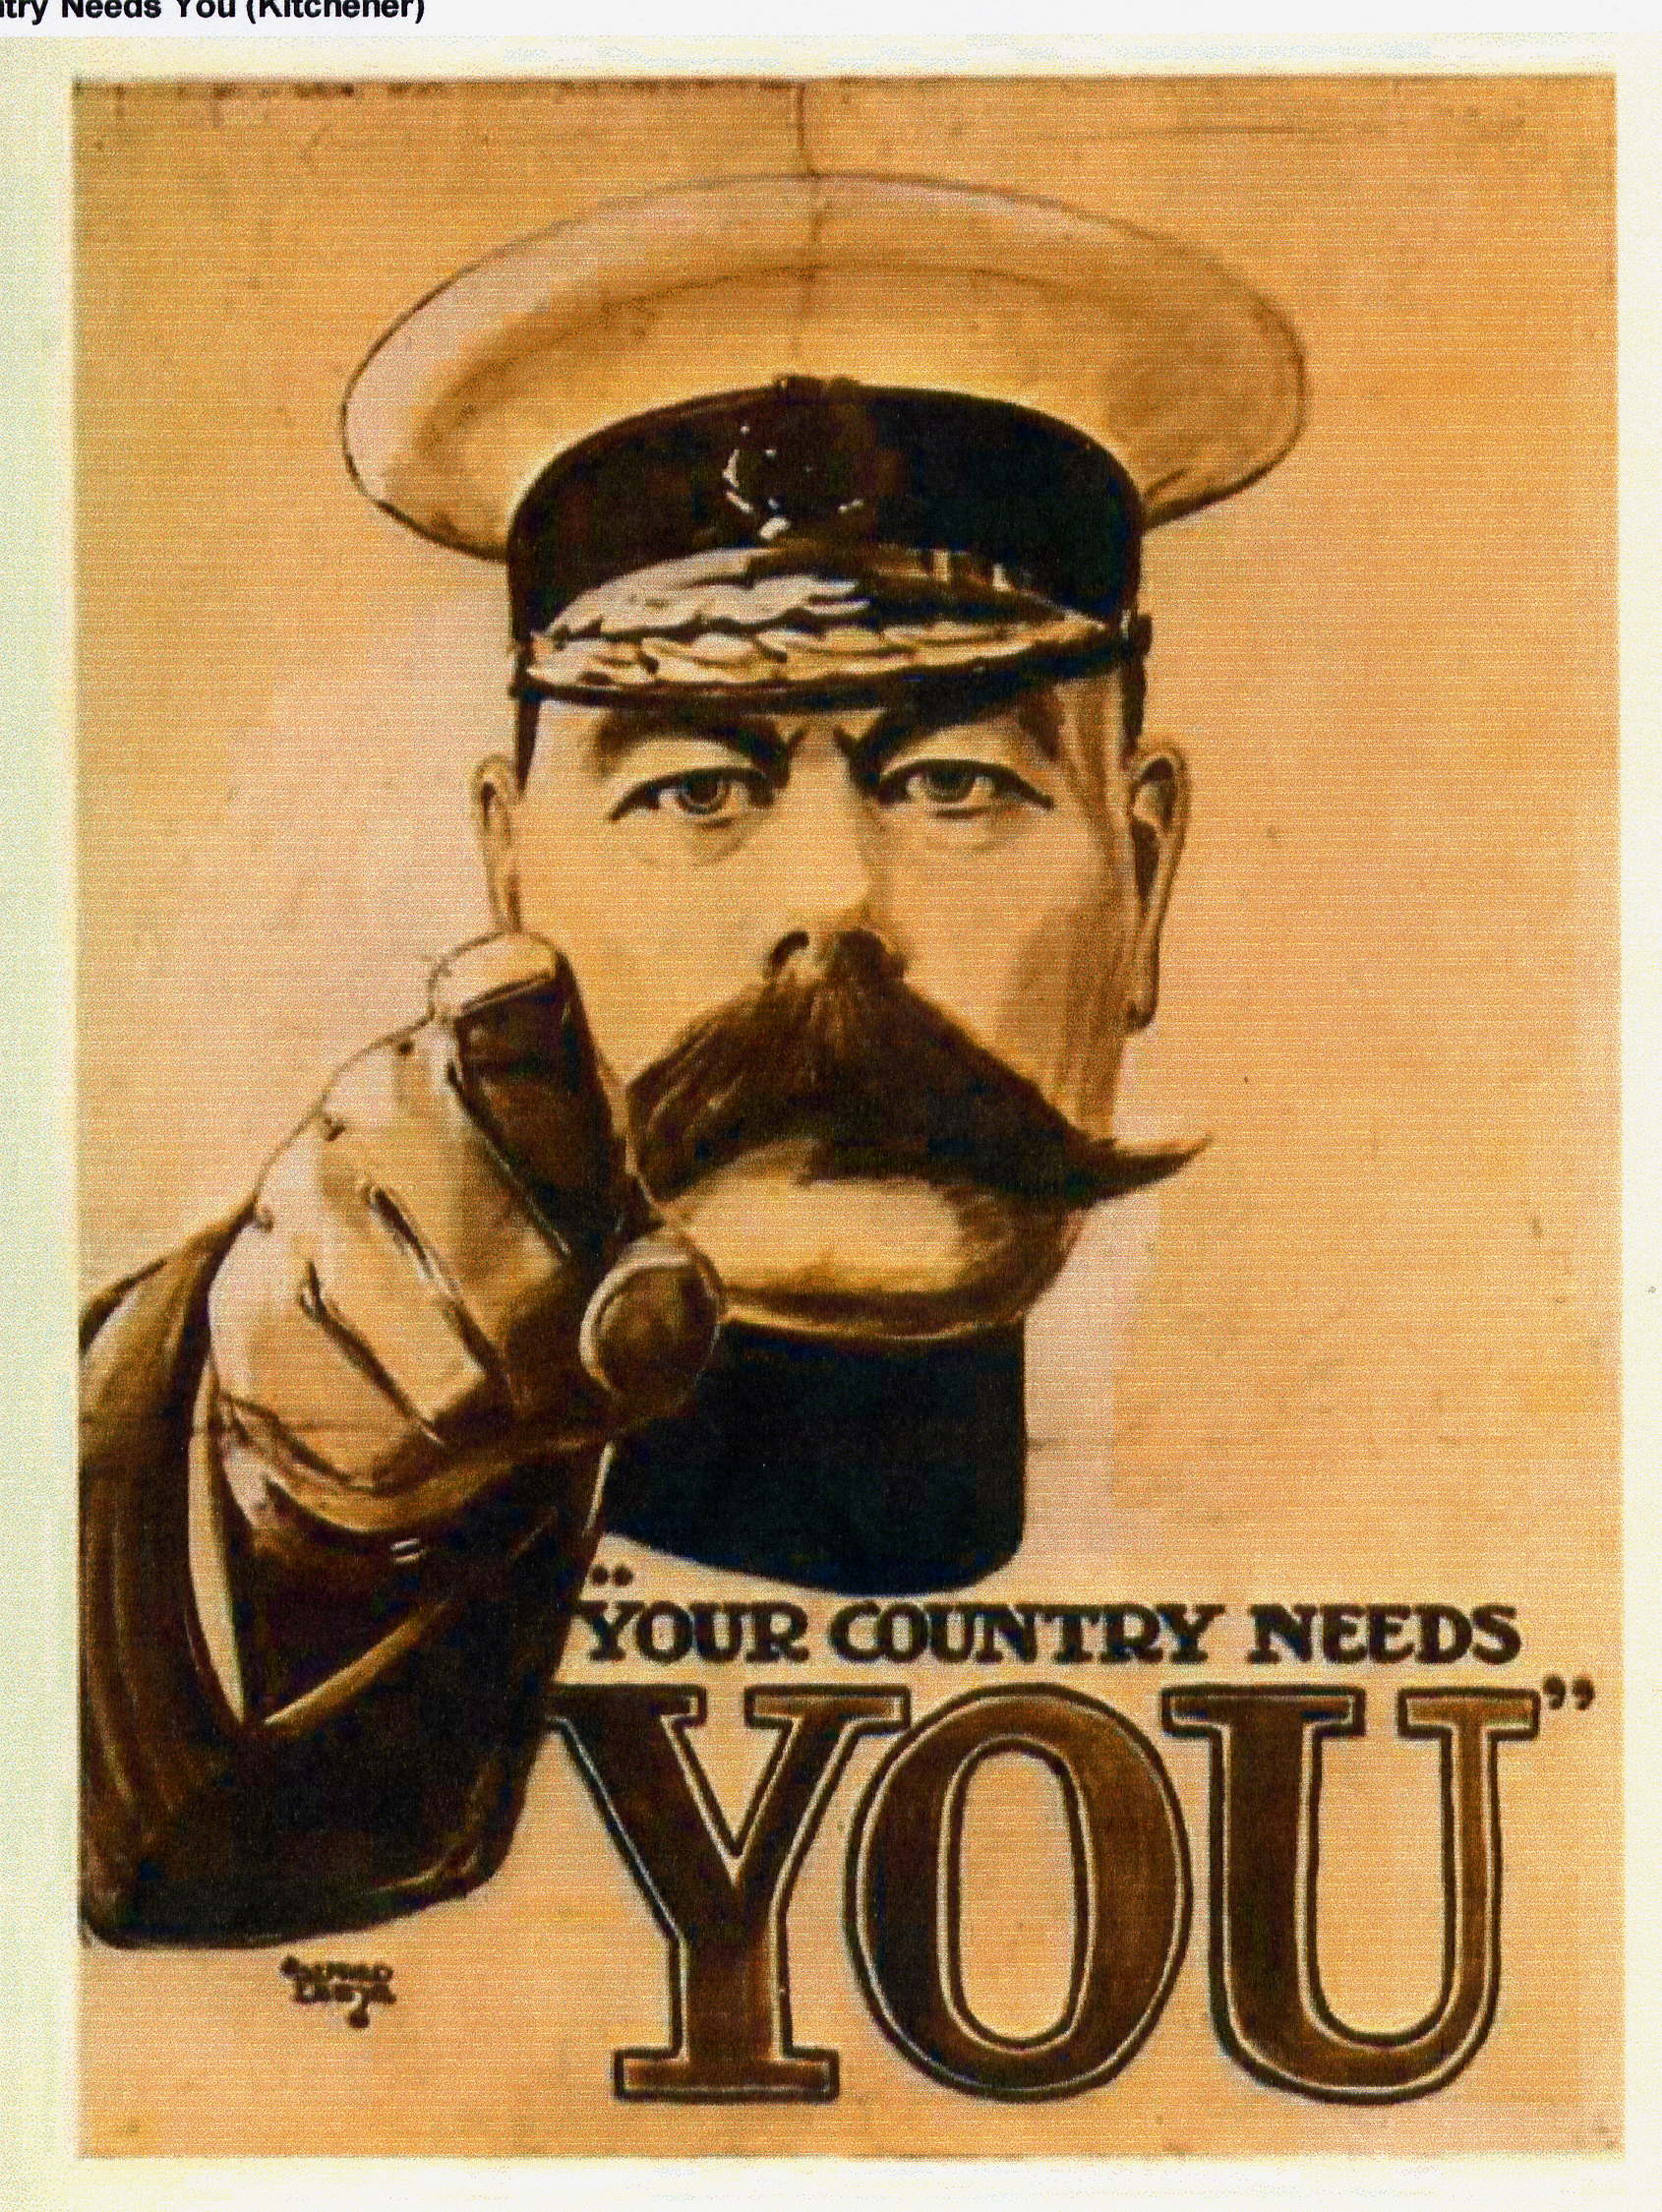 LORD KITCHENER "Your Country Needs You" Vintage Propaganda Poster A1A2A3A4Sizes 